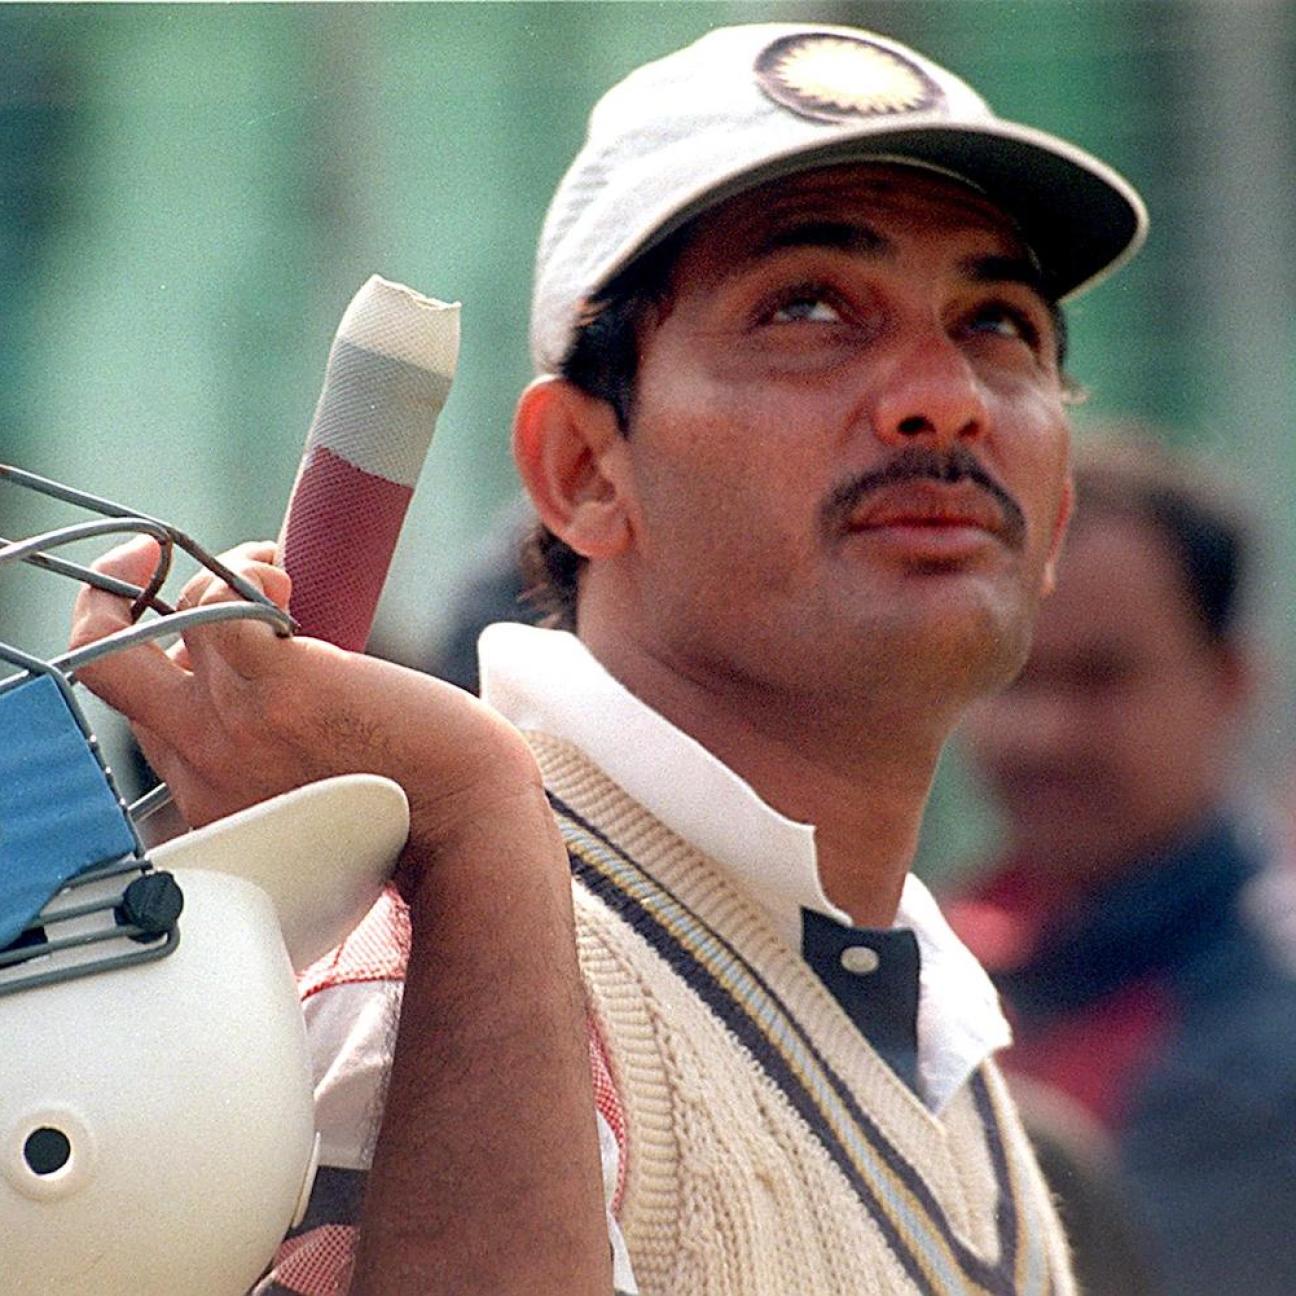 Before Dhoni, Mohammad Azharuddin had played the helicopter shot